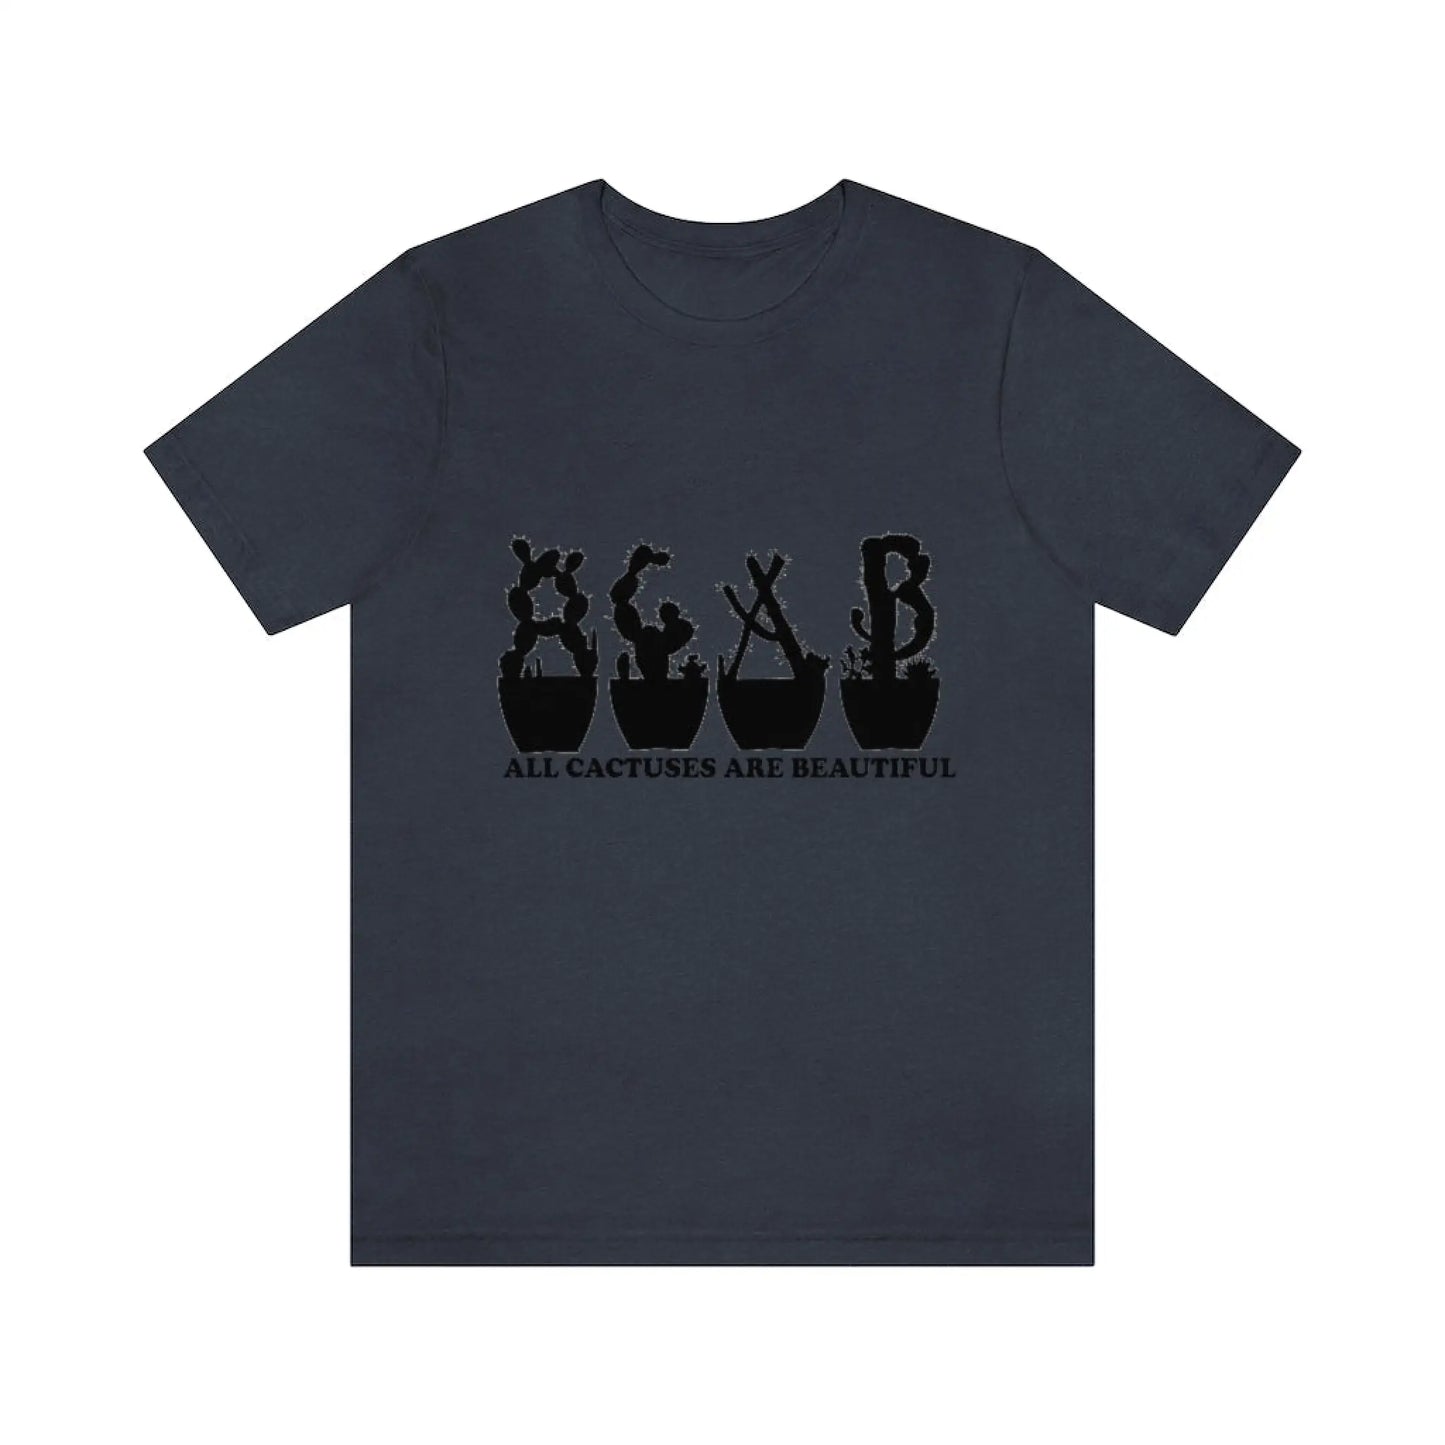 Shirts - All Cactuses Are Beautiful - Heather Navy / S -